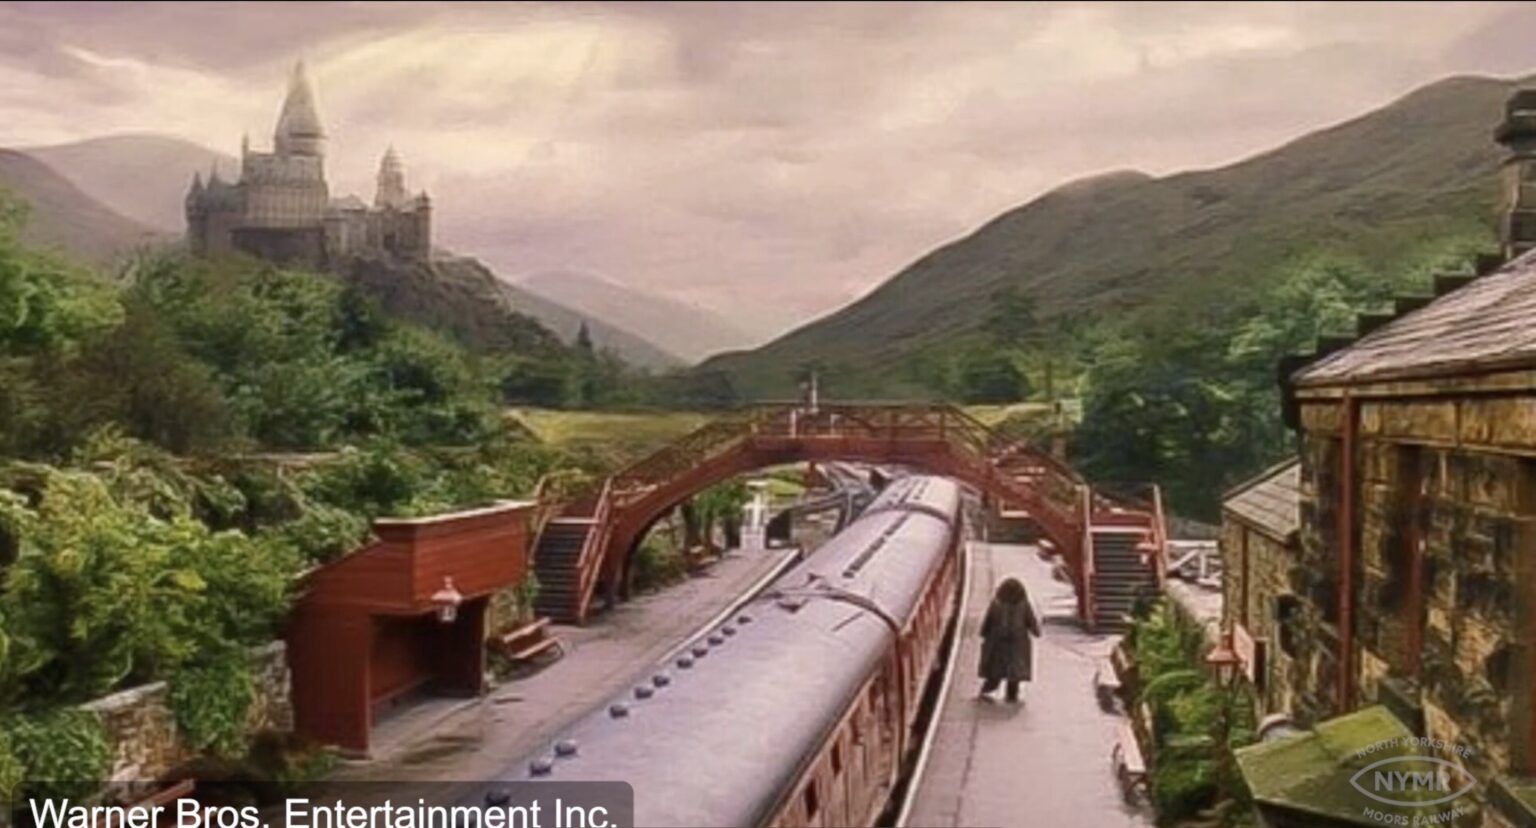 A crowdfunding campaign aims to save the iconic bridge leading to the real Hogsmeade station from Harry Potter films, urging fans to donate £10 for urgent repairs, ensuring access to the beloved site in North Yorkshire.